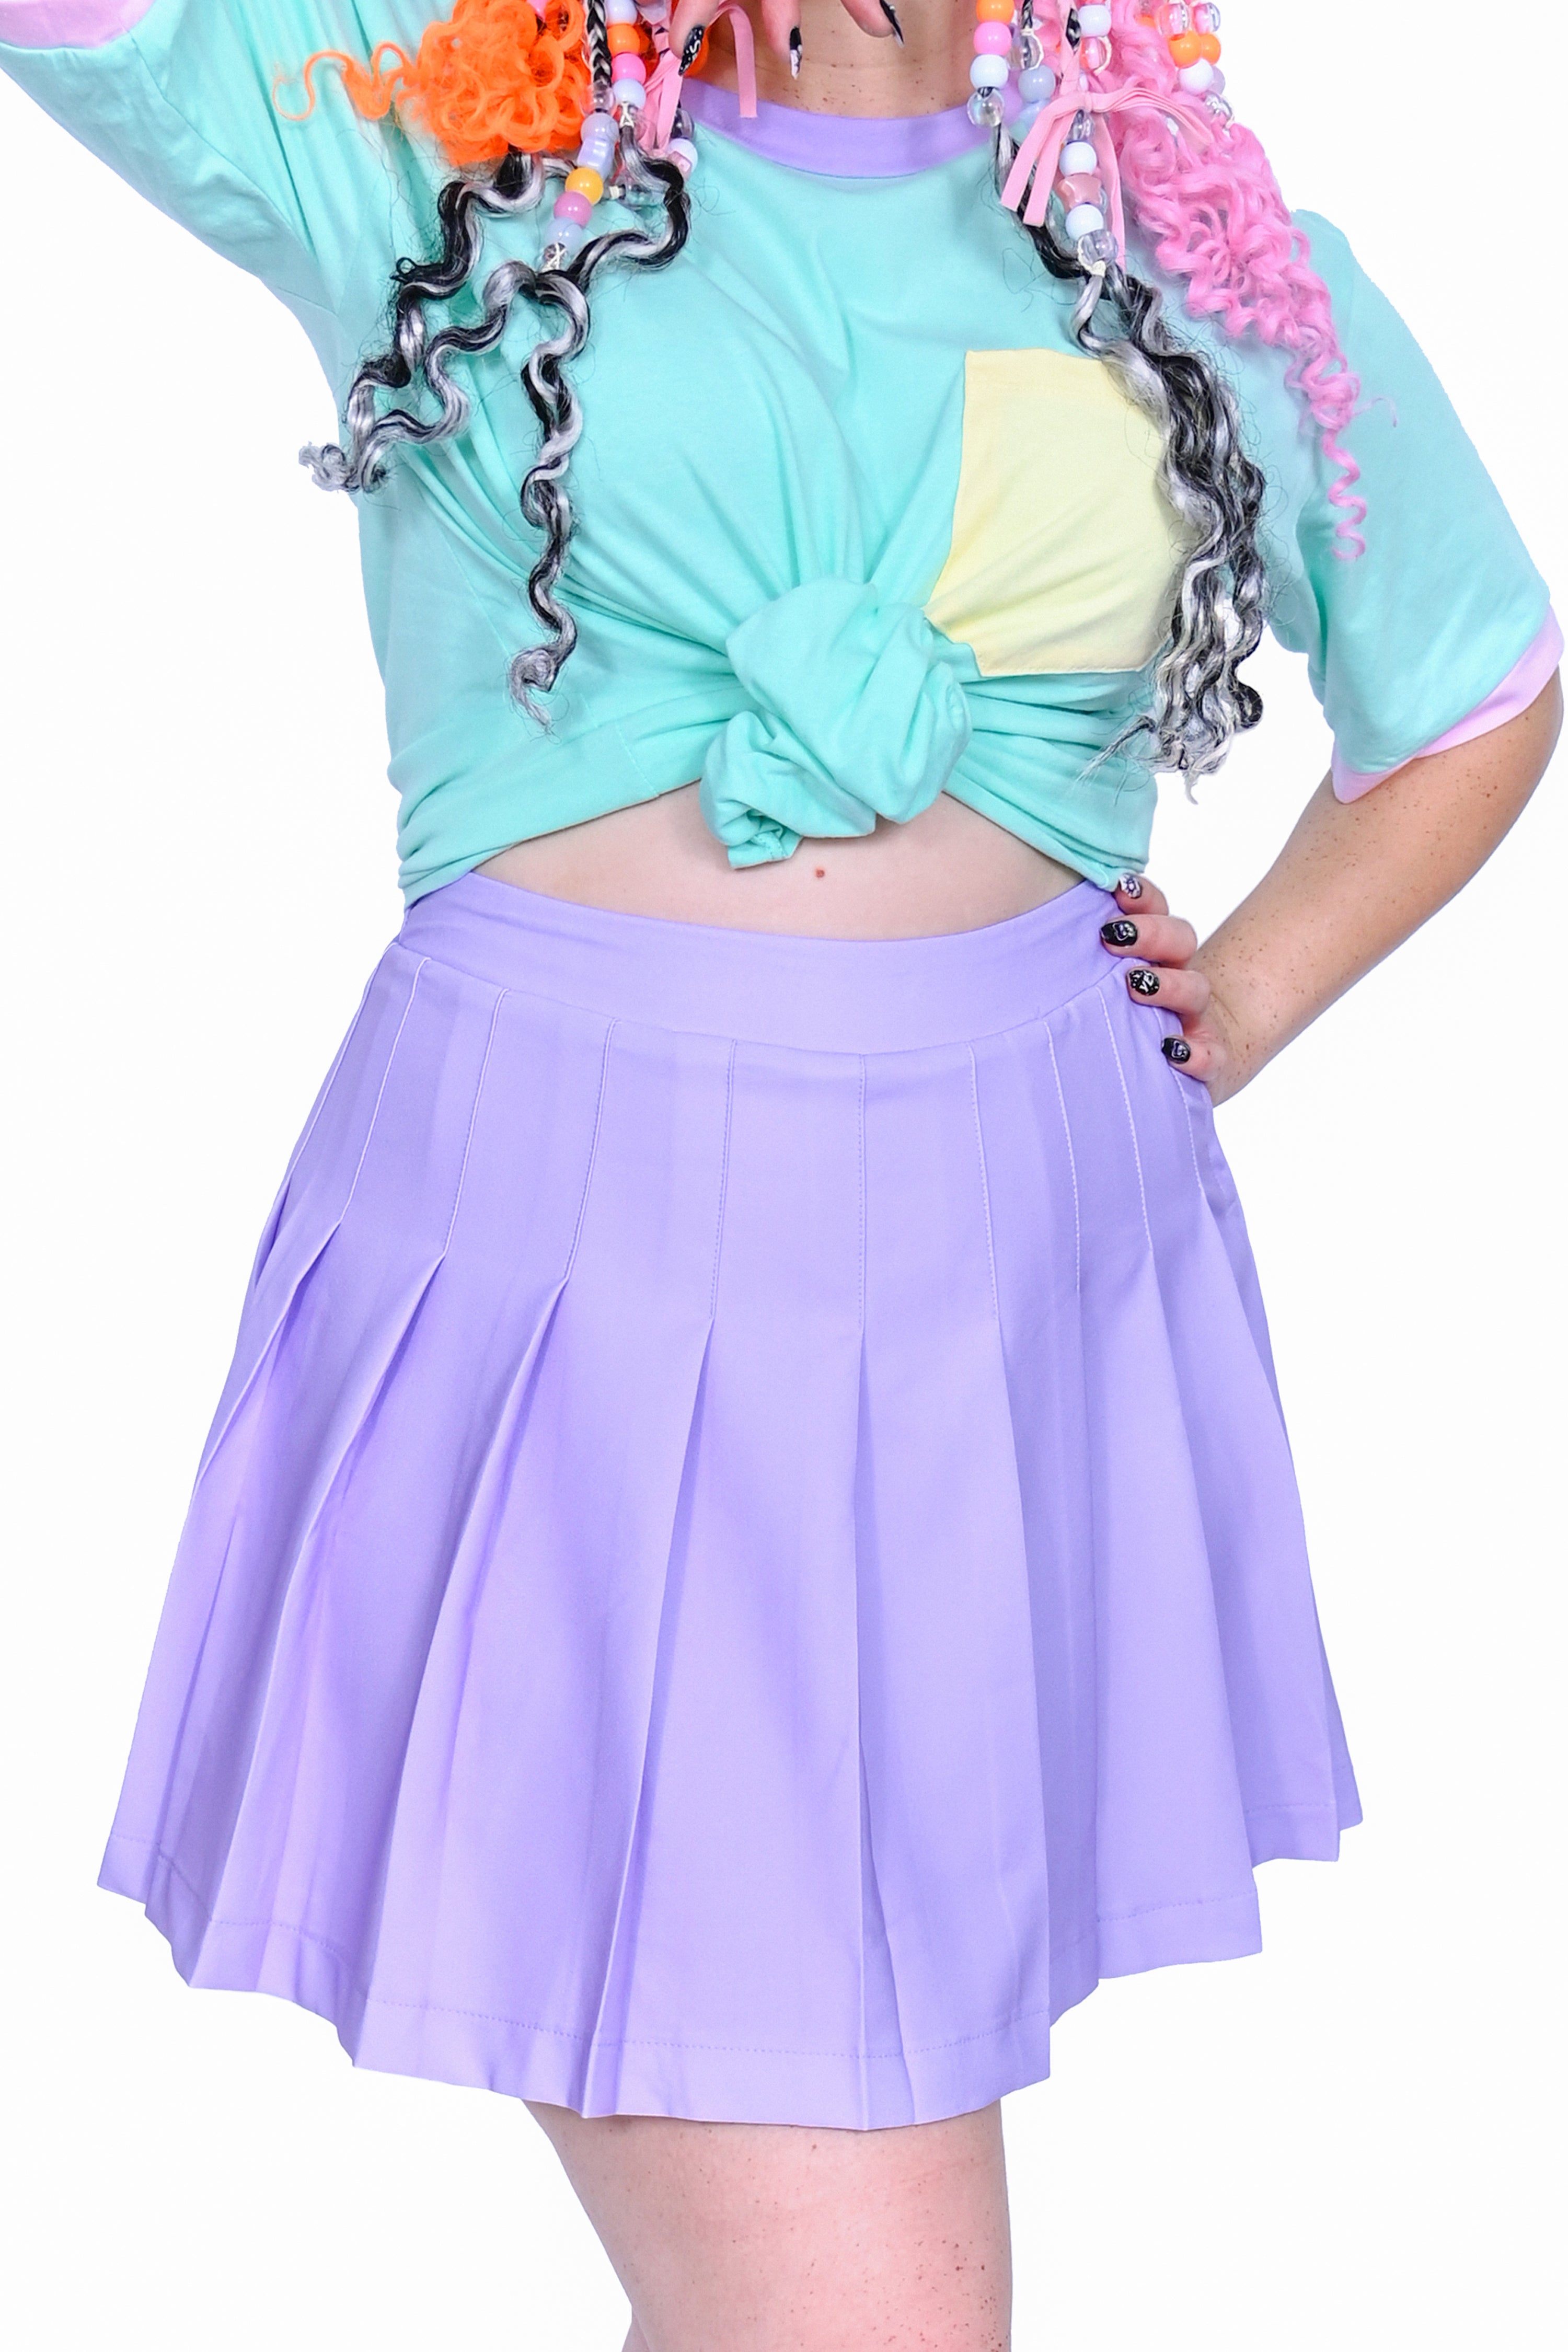 Lavender pleated skirt with side zipper and built in safety shorts